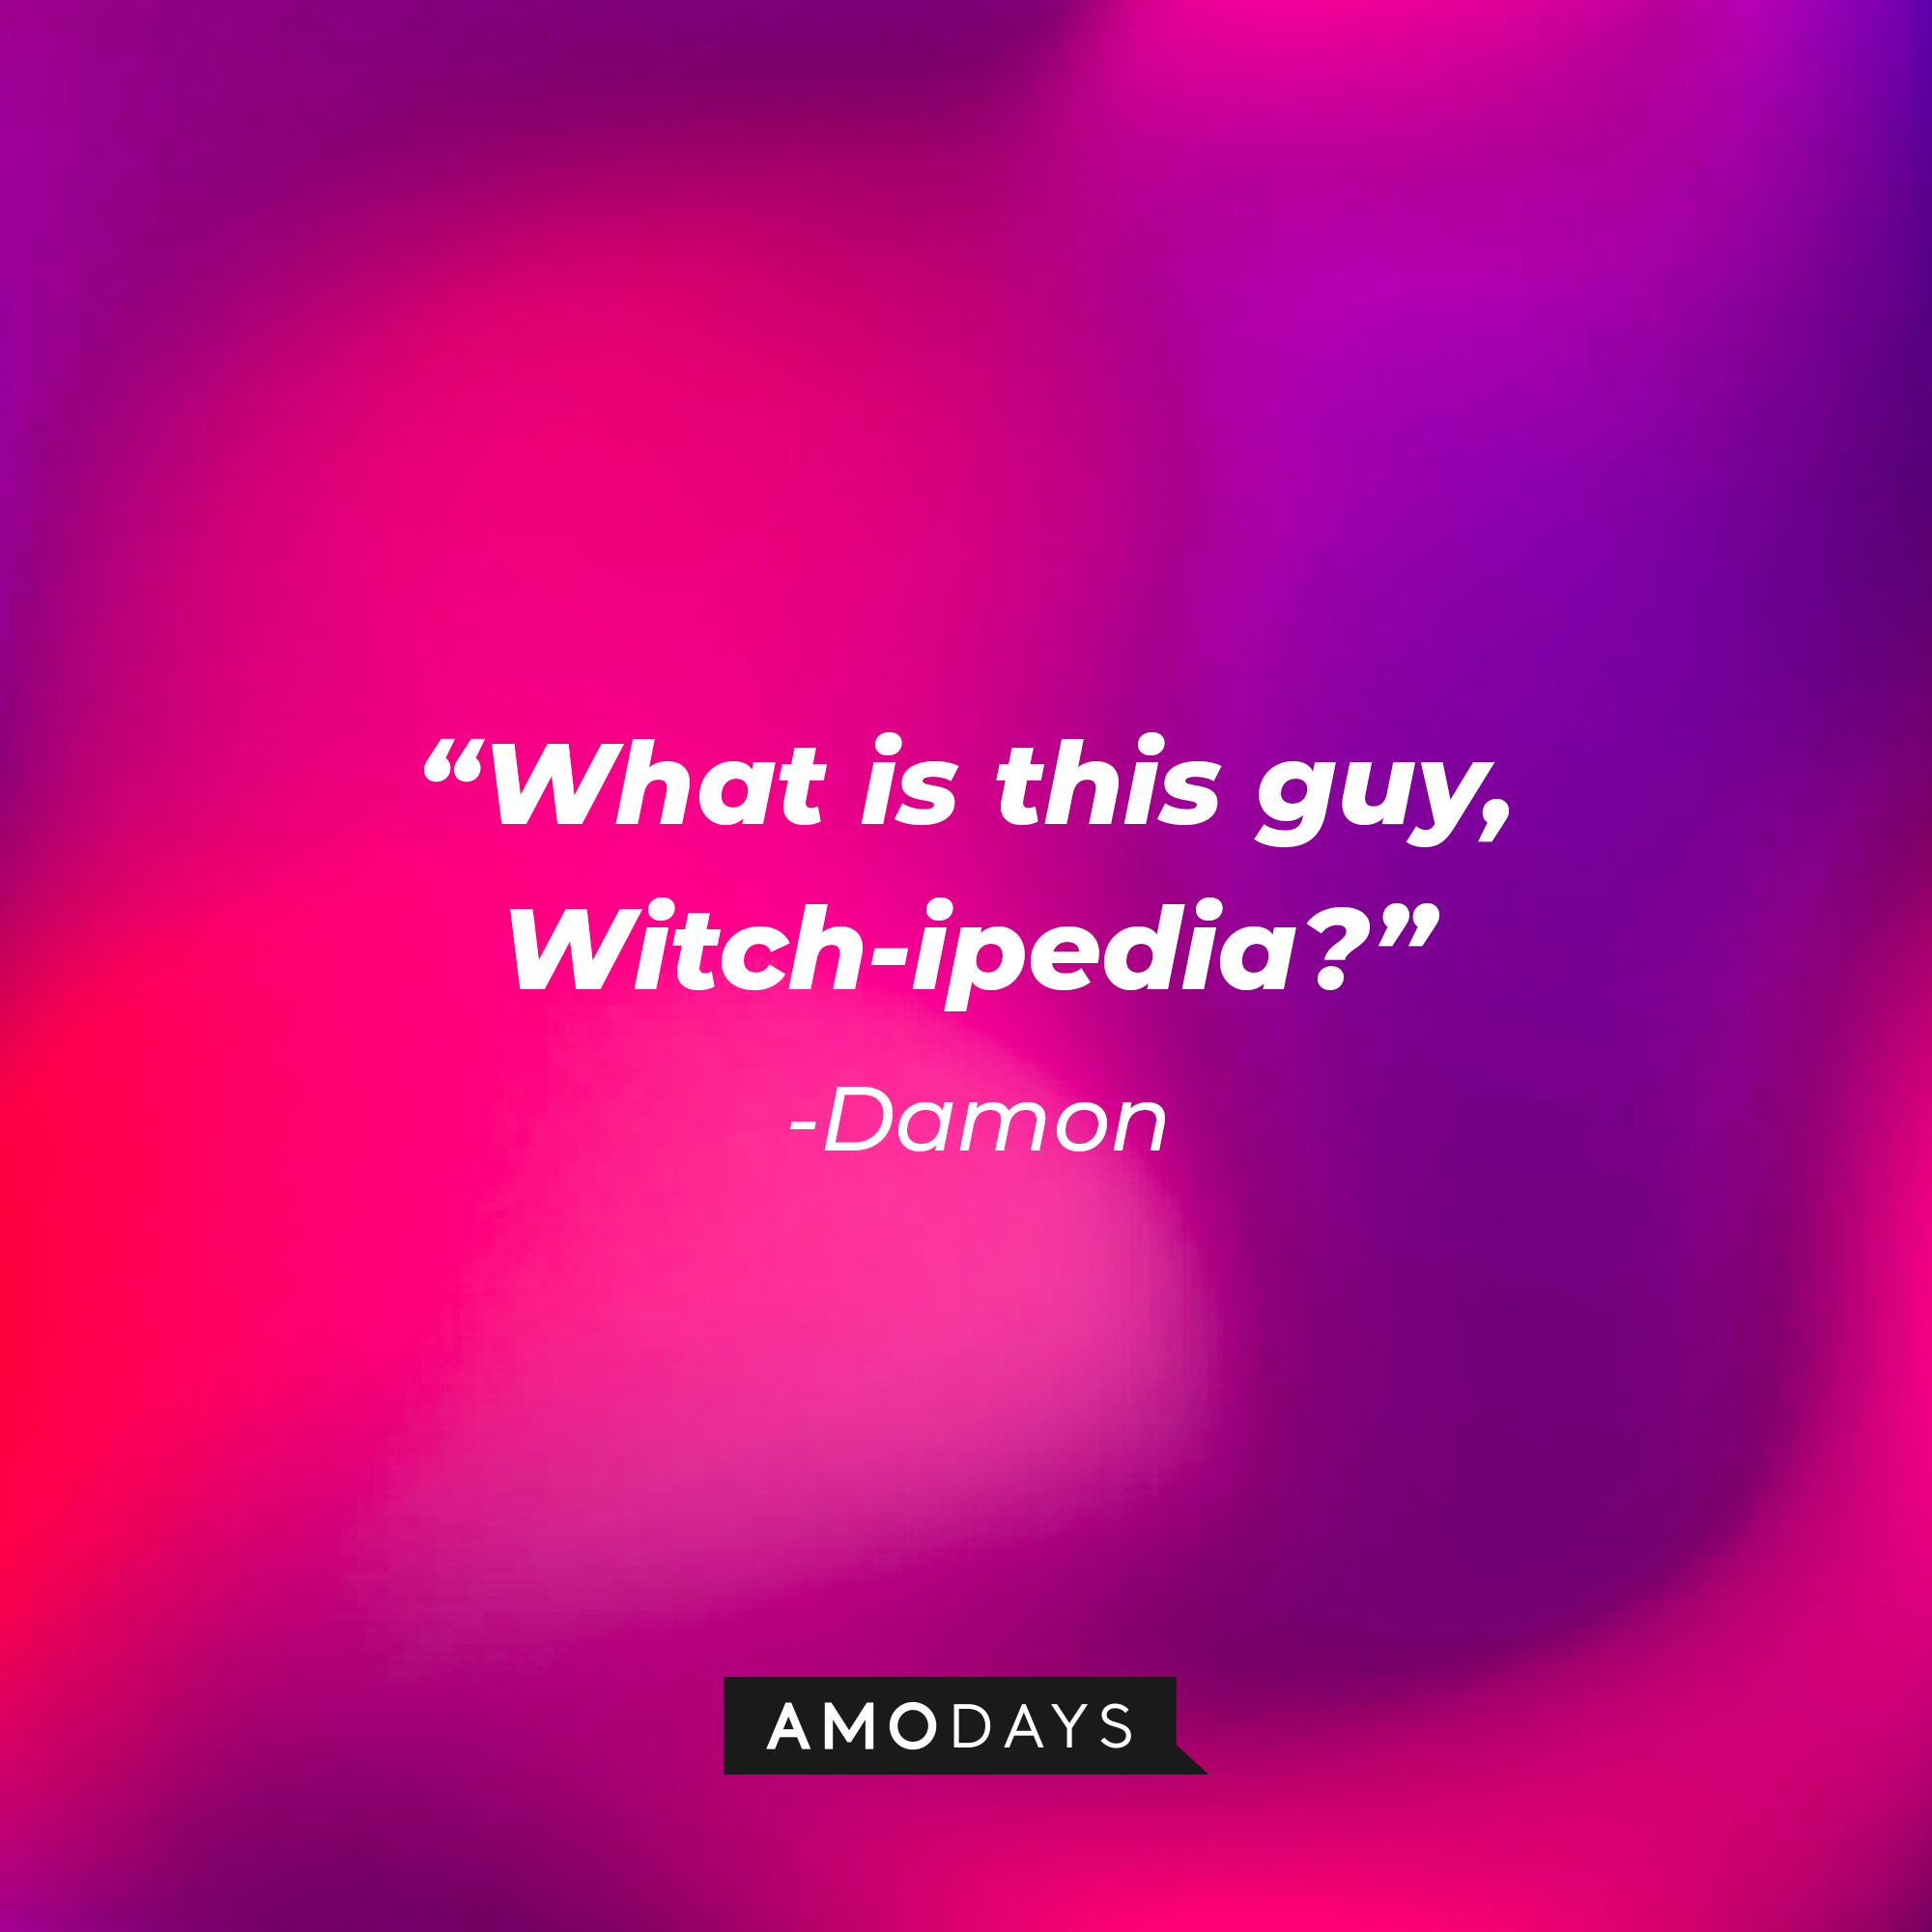 Damon's quote: "What is this guy, Witch-ipedia?" | Source: Amodays